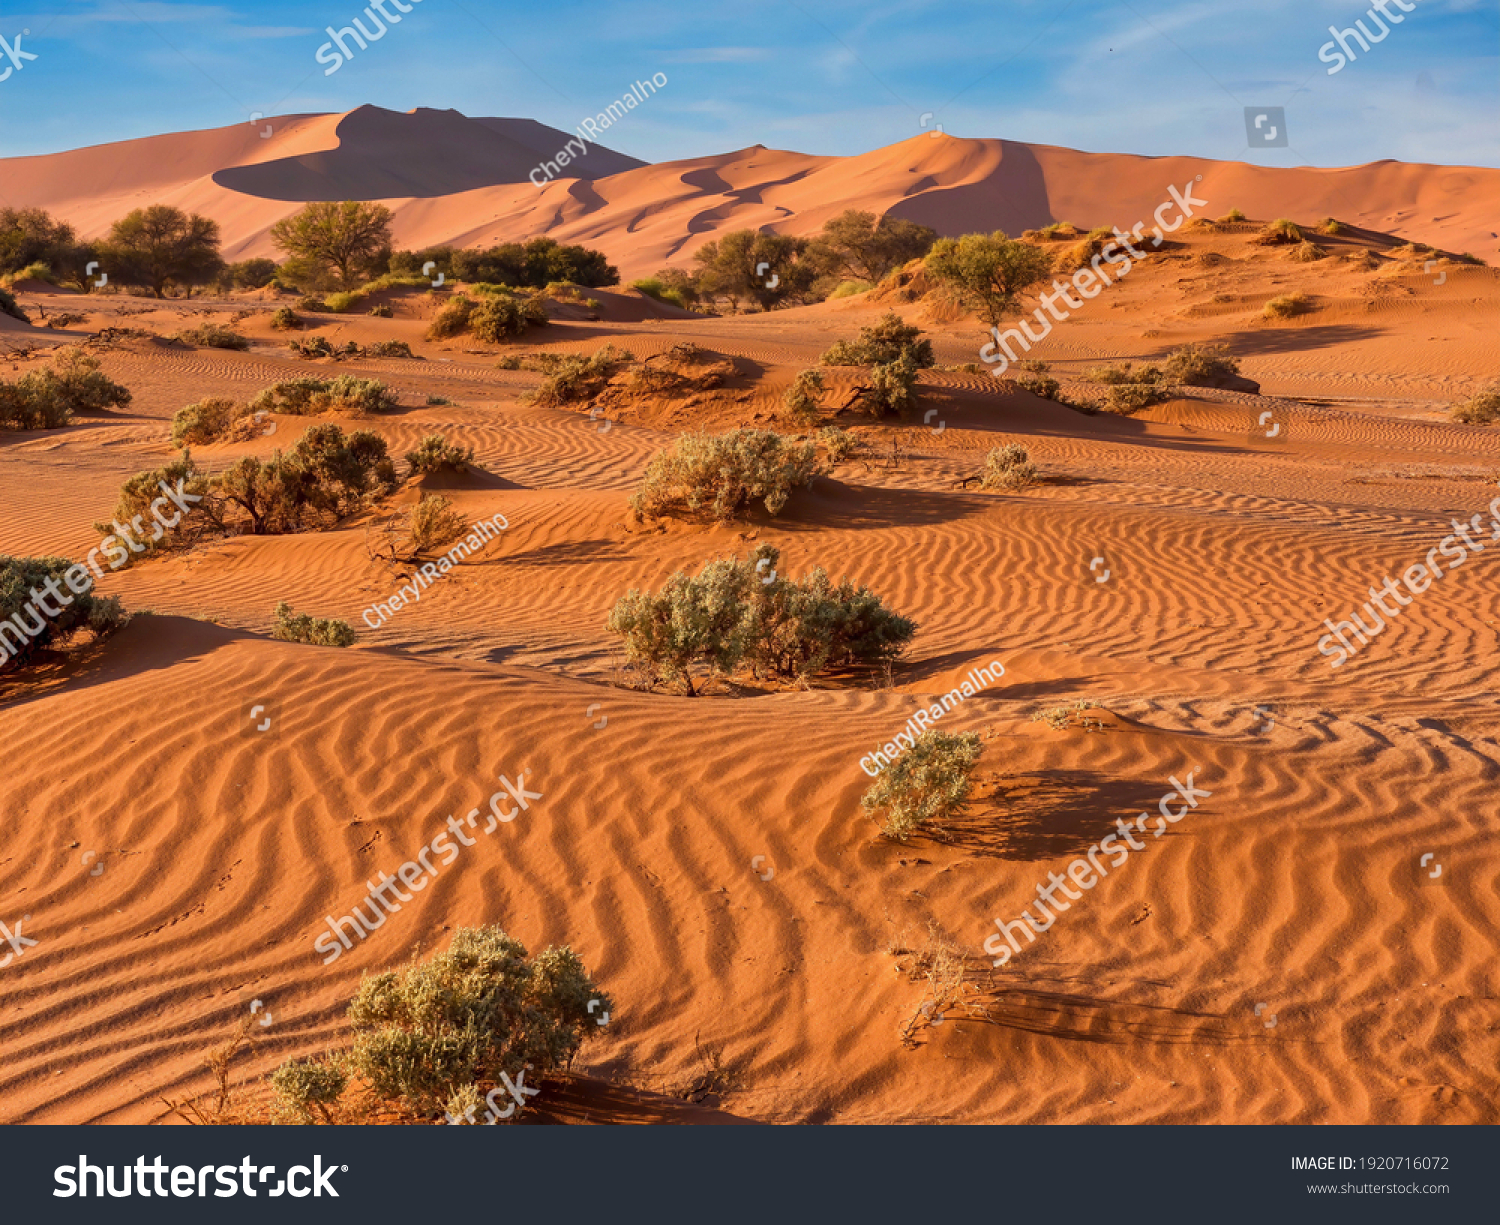 The red, windswept sand of Sossusvlei in the Namib Desert, Namibia, where vegetation has adapted to survive the harsh conditions. The large sand dune known as Big Daddy, is in the background. #1920716072